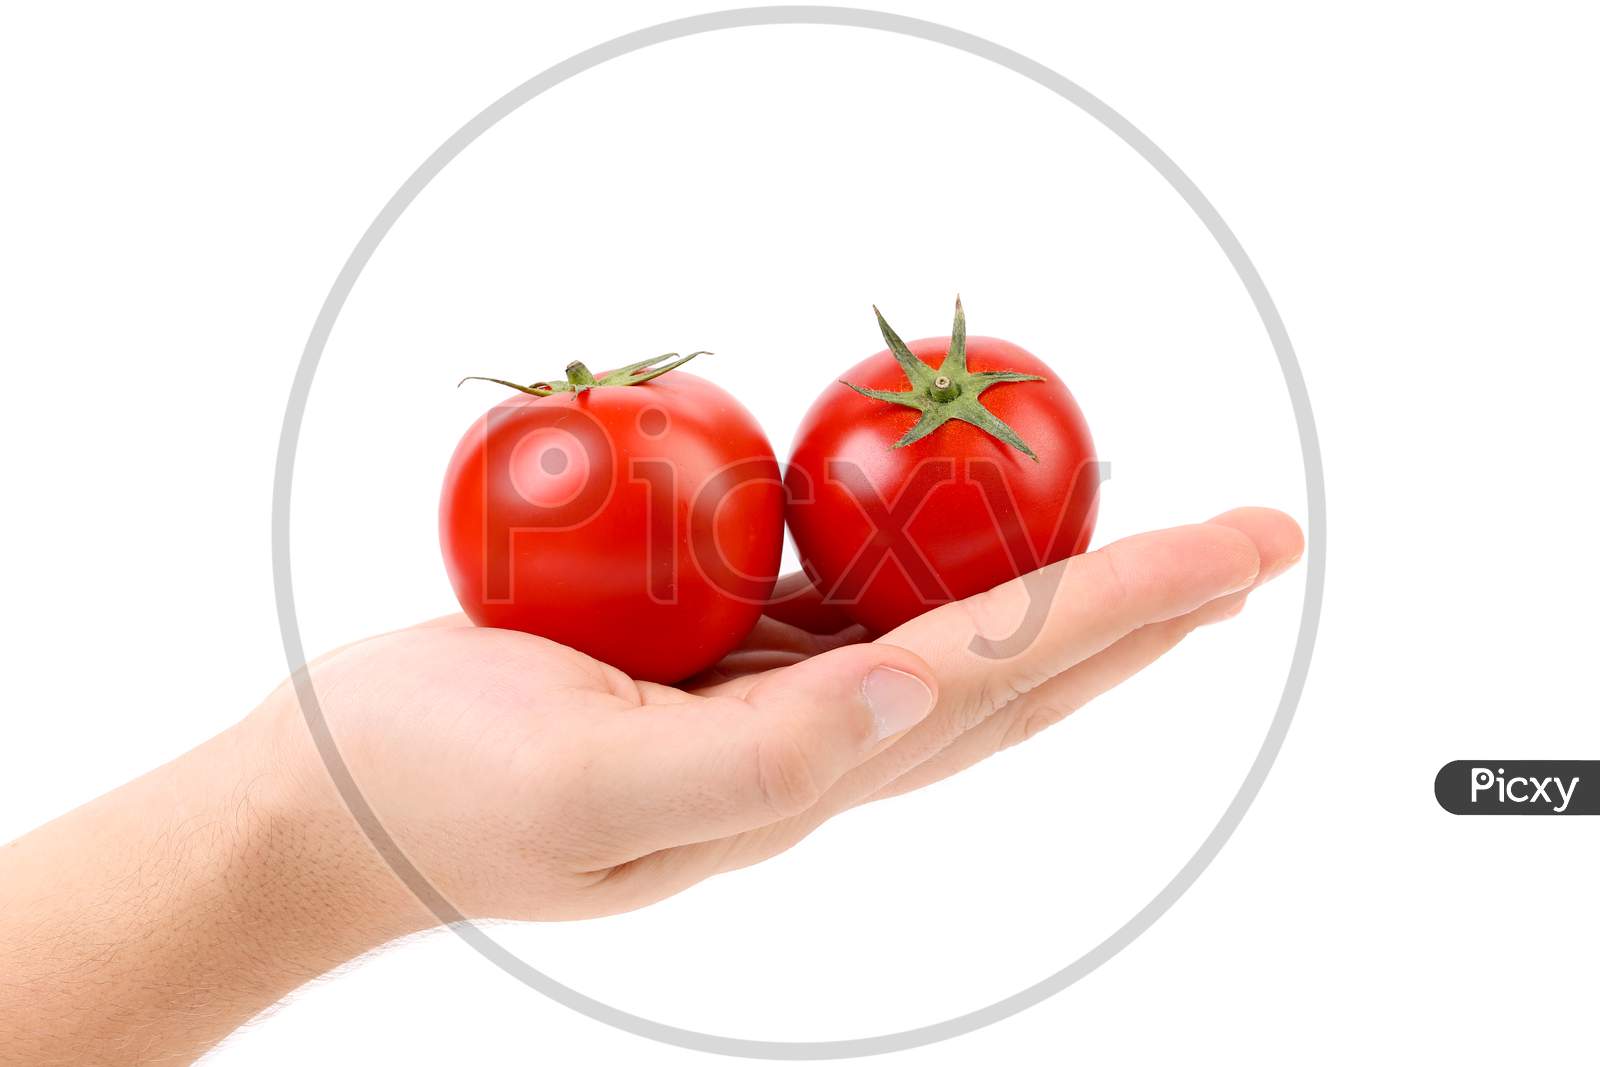 Two Fresh Tomato On Hand. Isolated On A White Background.